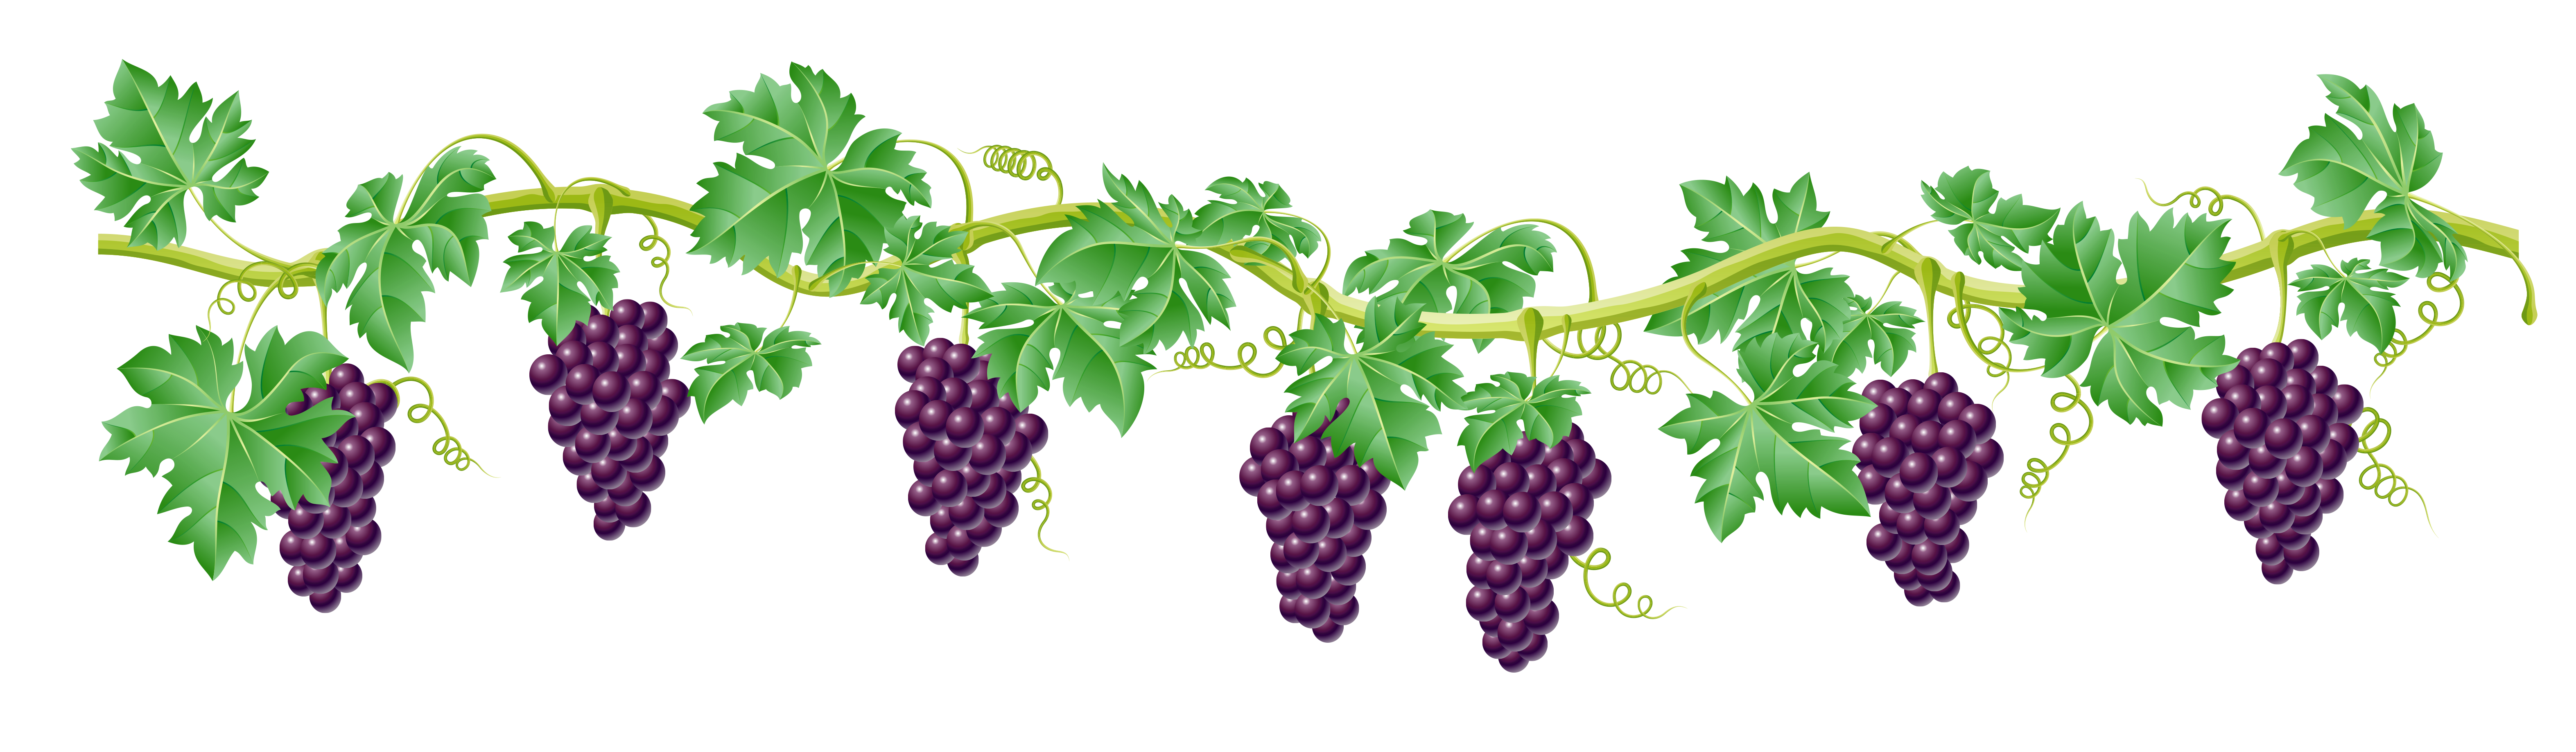 Download PNG image - Grapevine PNG Image 